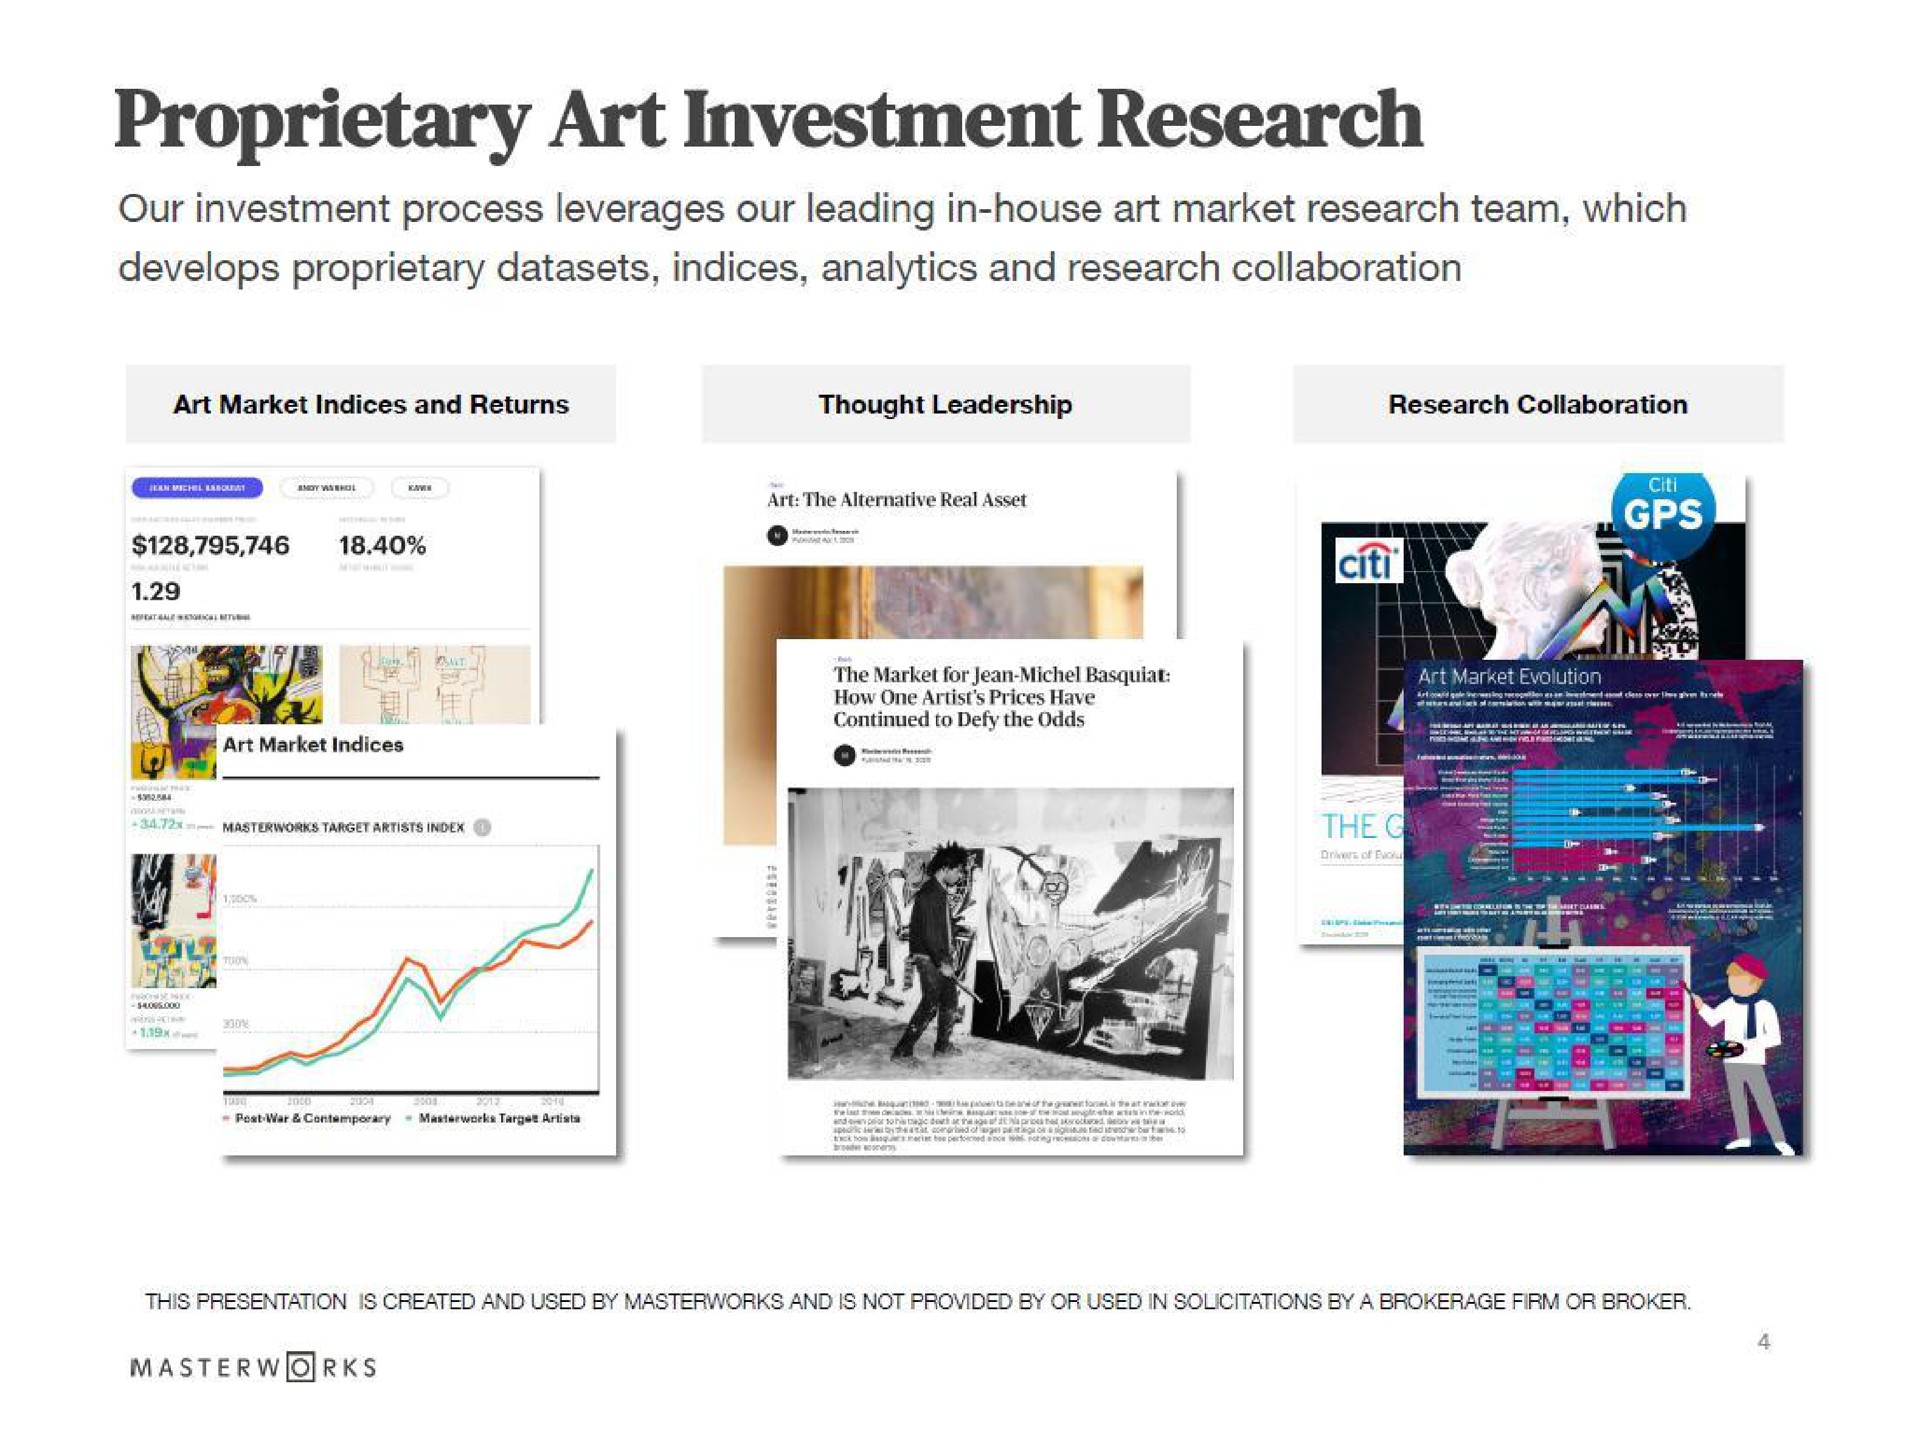 proprietary art investment research our investment process leverages our leading in house art market research team which develops proprietary indices analytics and research collaboration | Masterworks